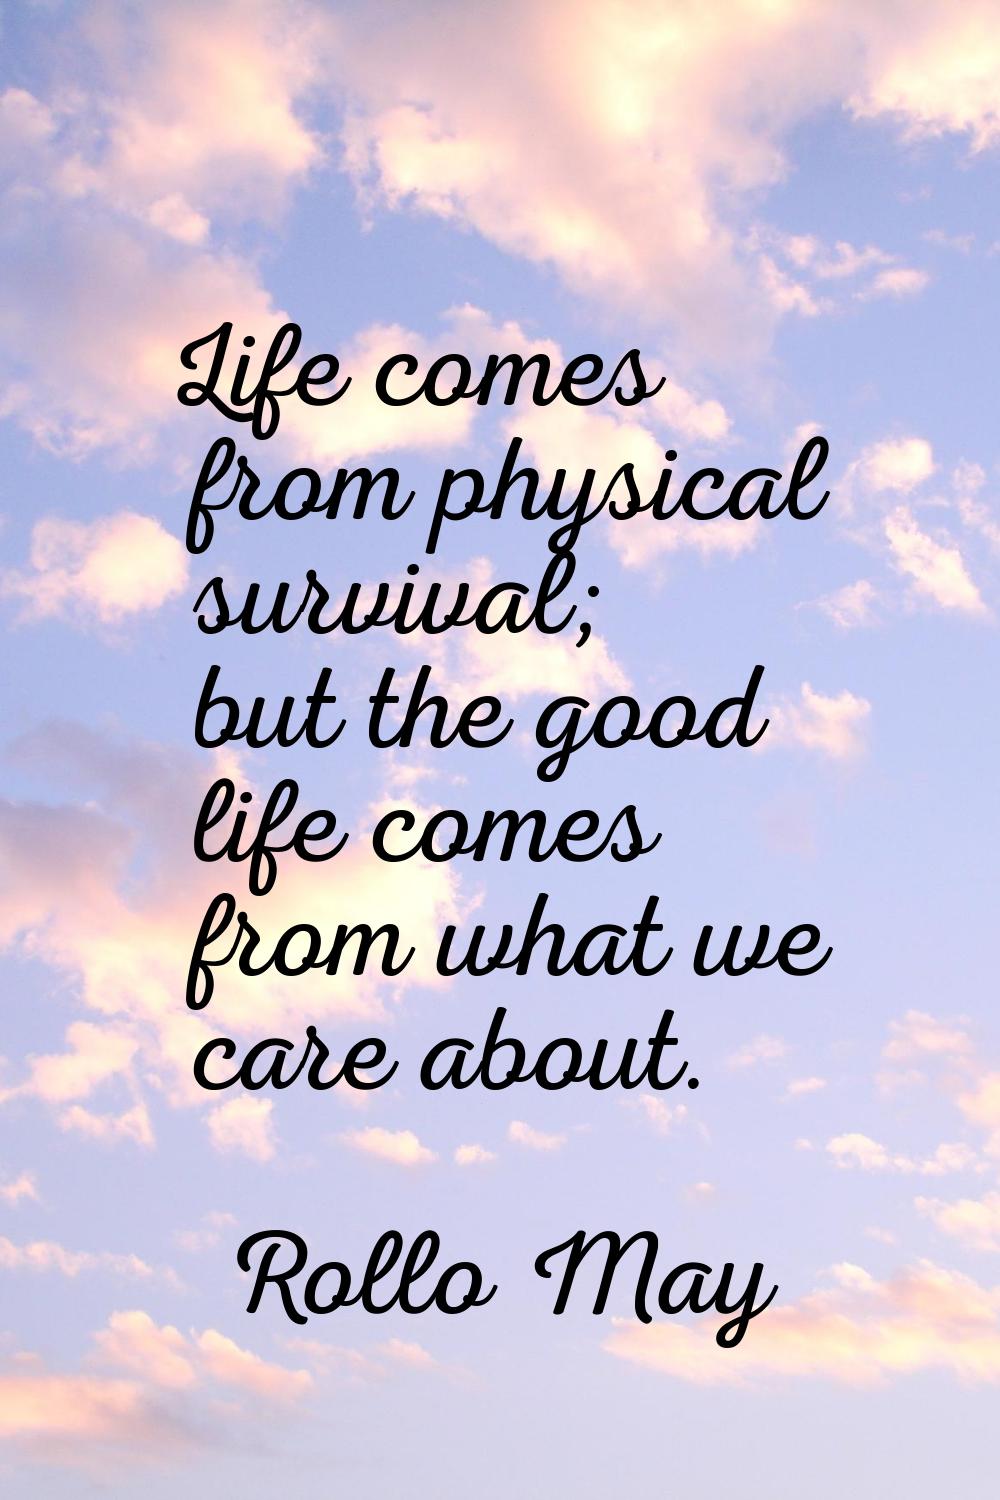 Life comes from physical survival; but the good life comes from what we care about.